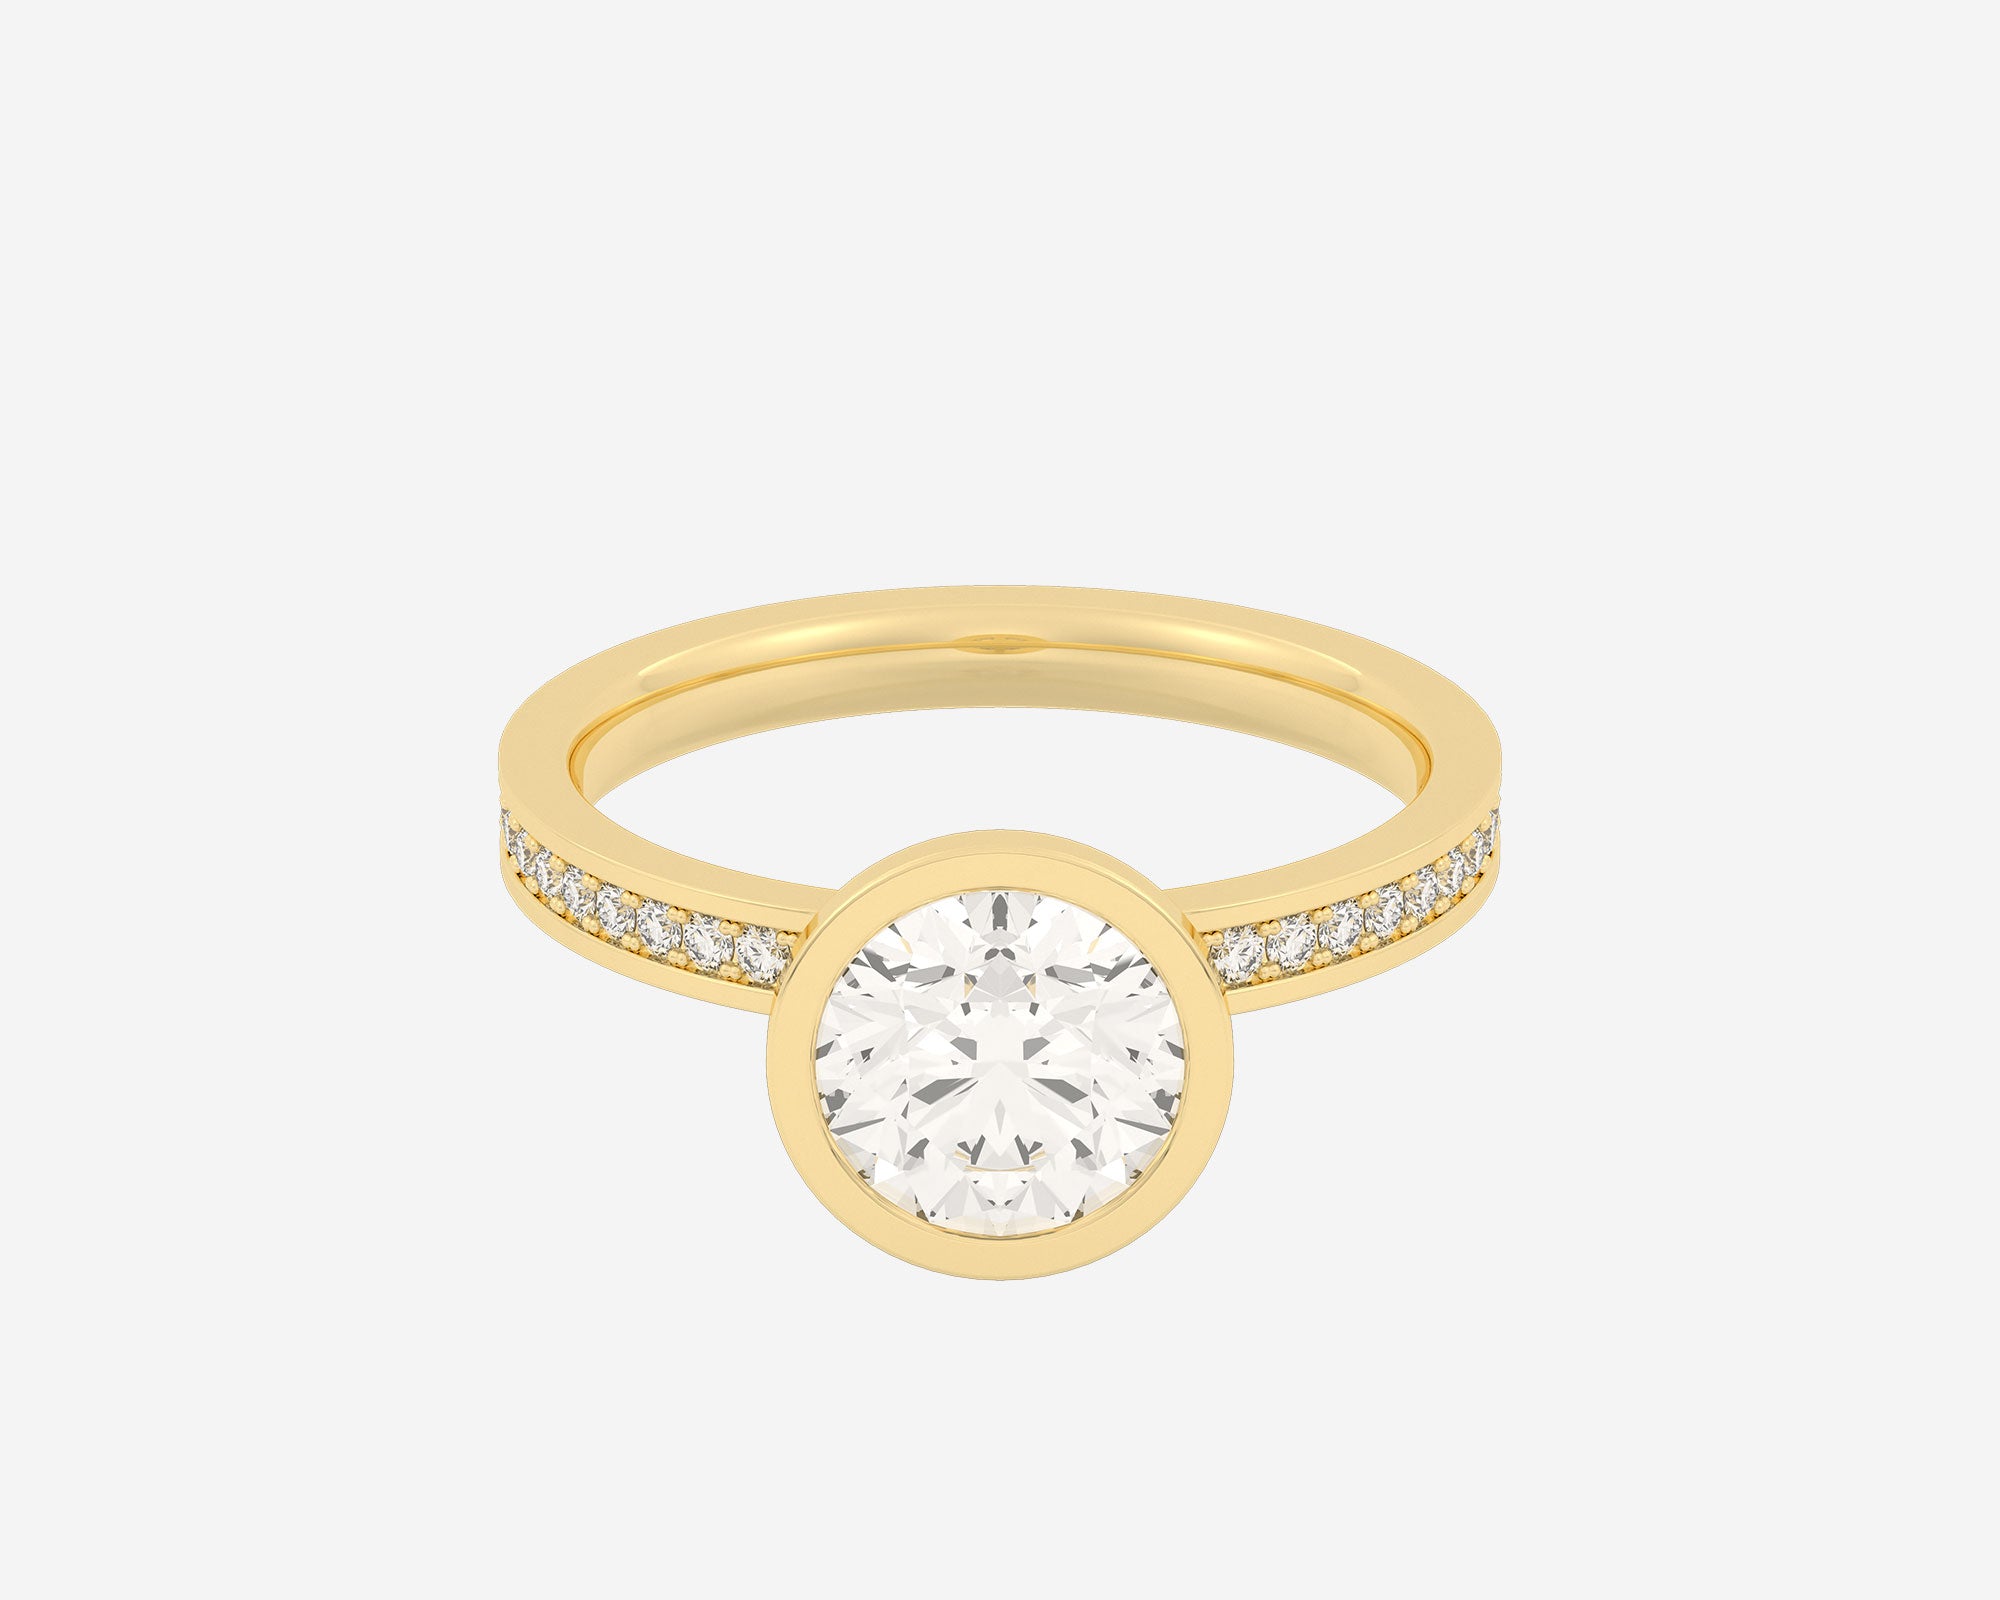 The Eternity Bezel Solitaire with a Round Diamond